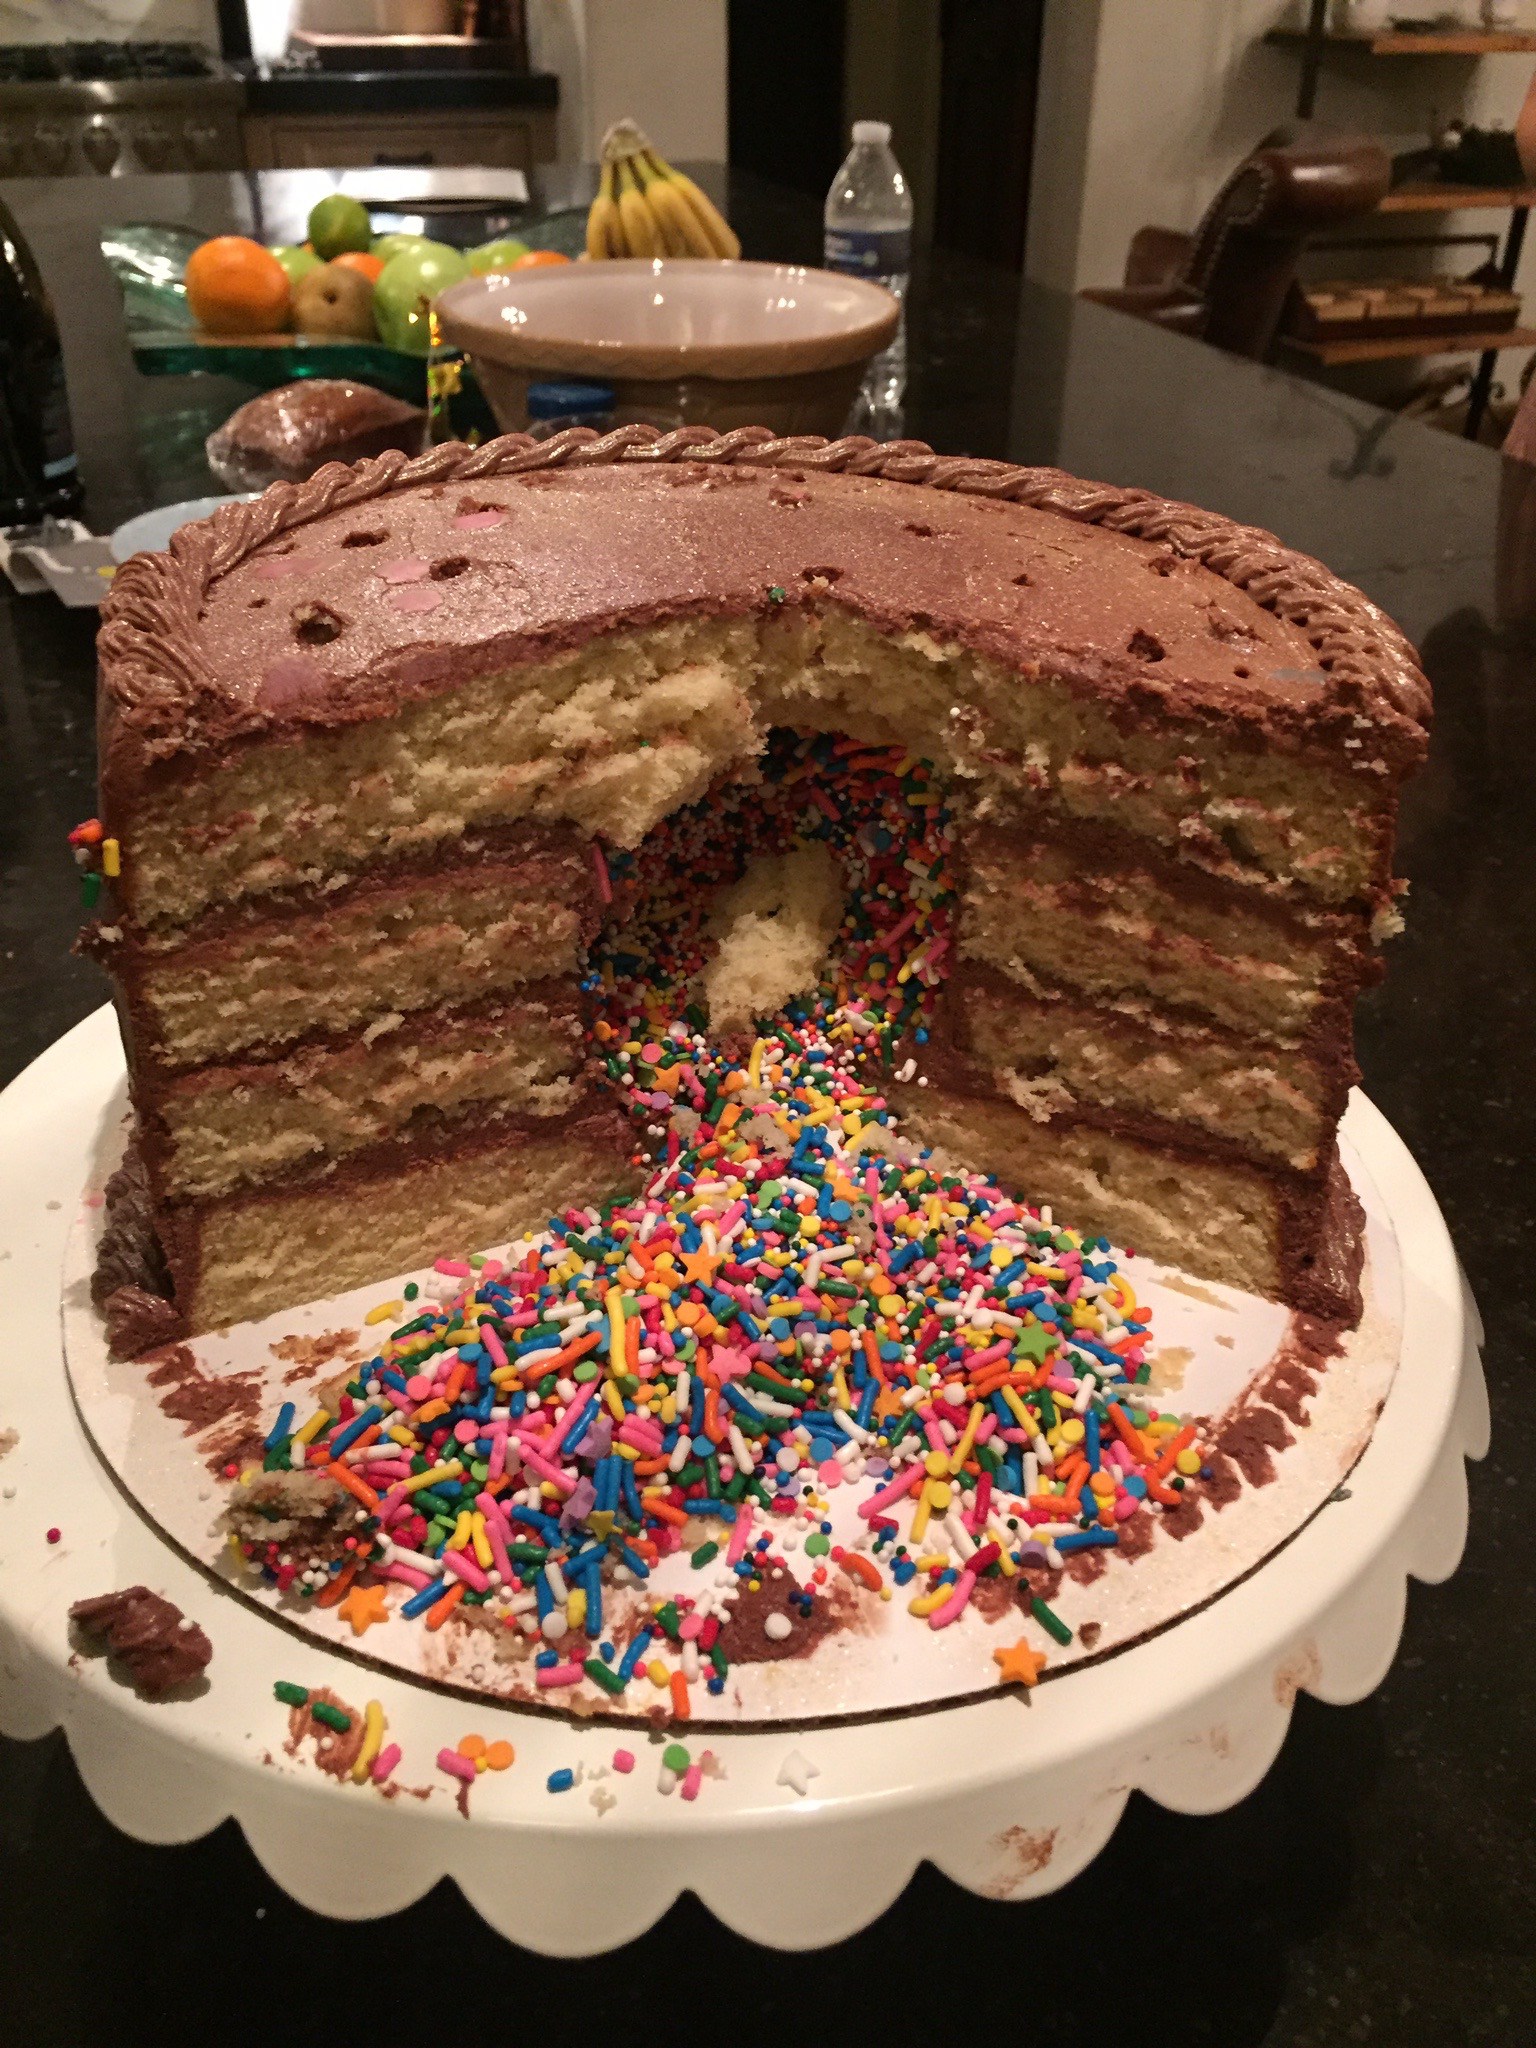 My friend Katie bakes the best cakes. She surprised me and filled this one with sprinkles. 30 can be fun!